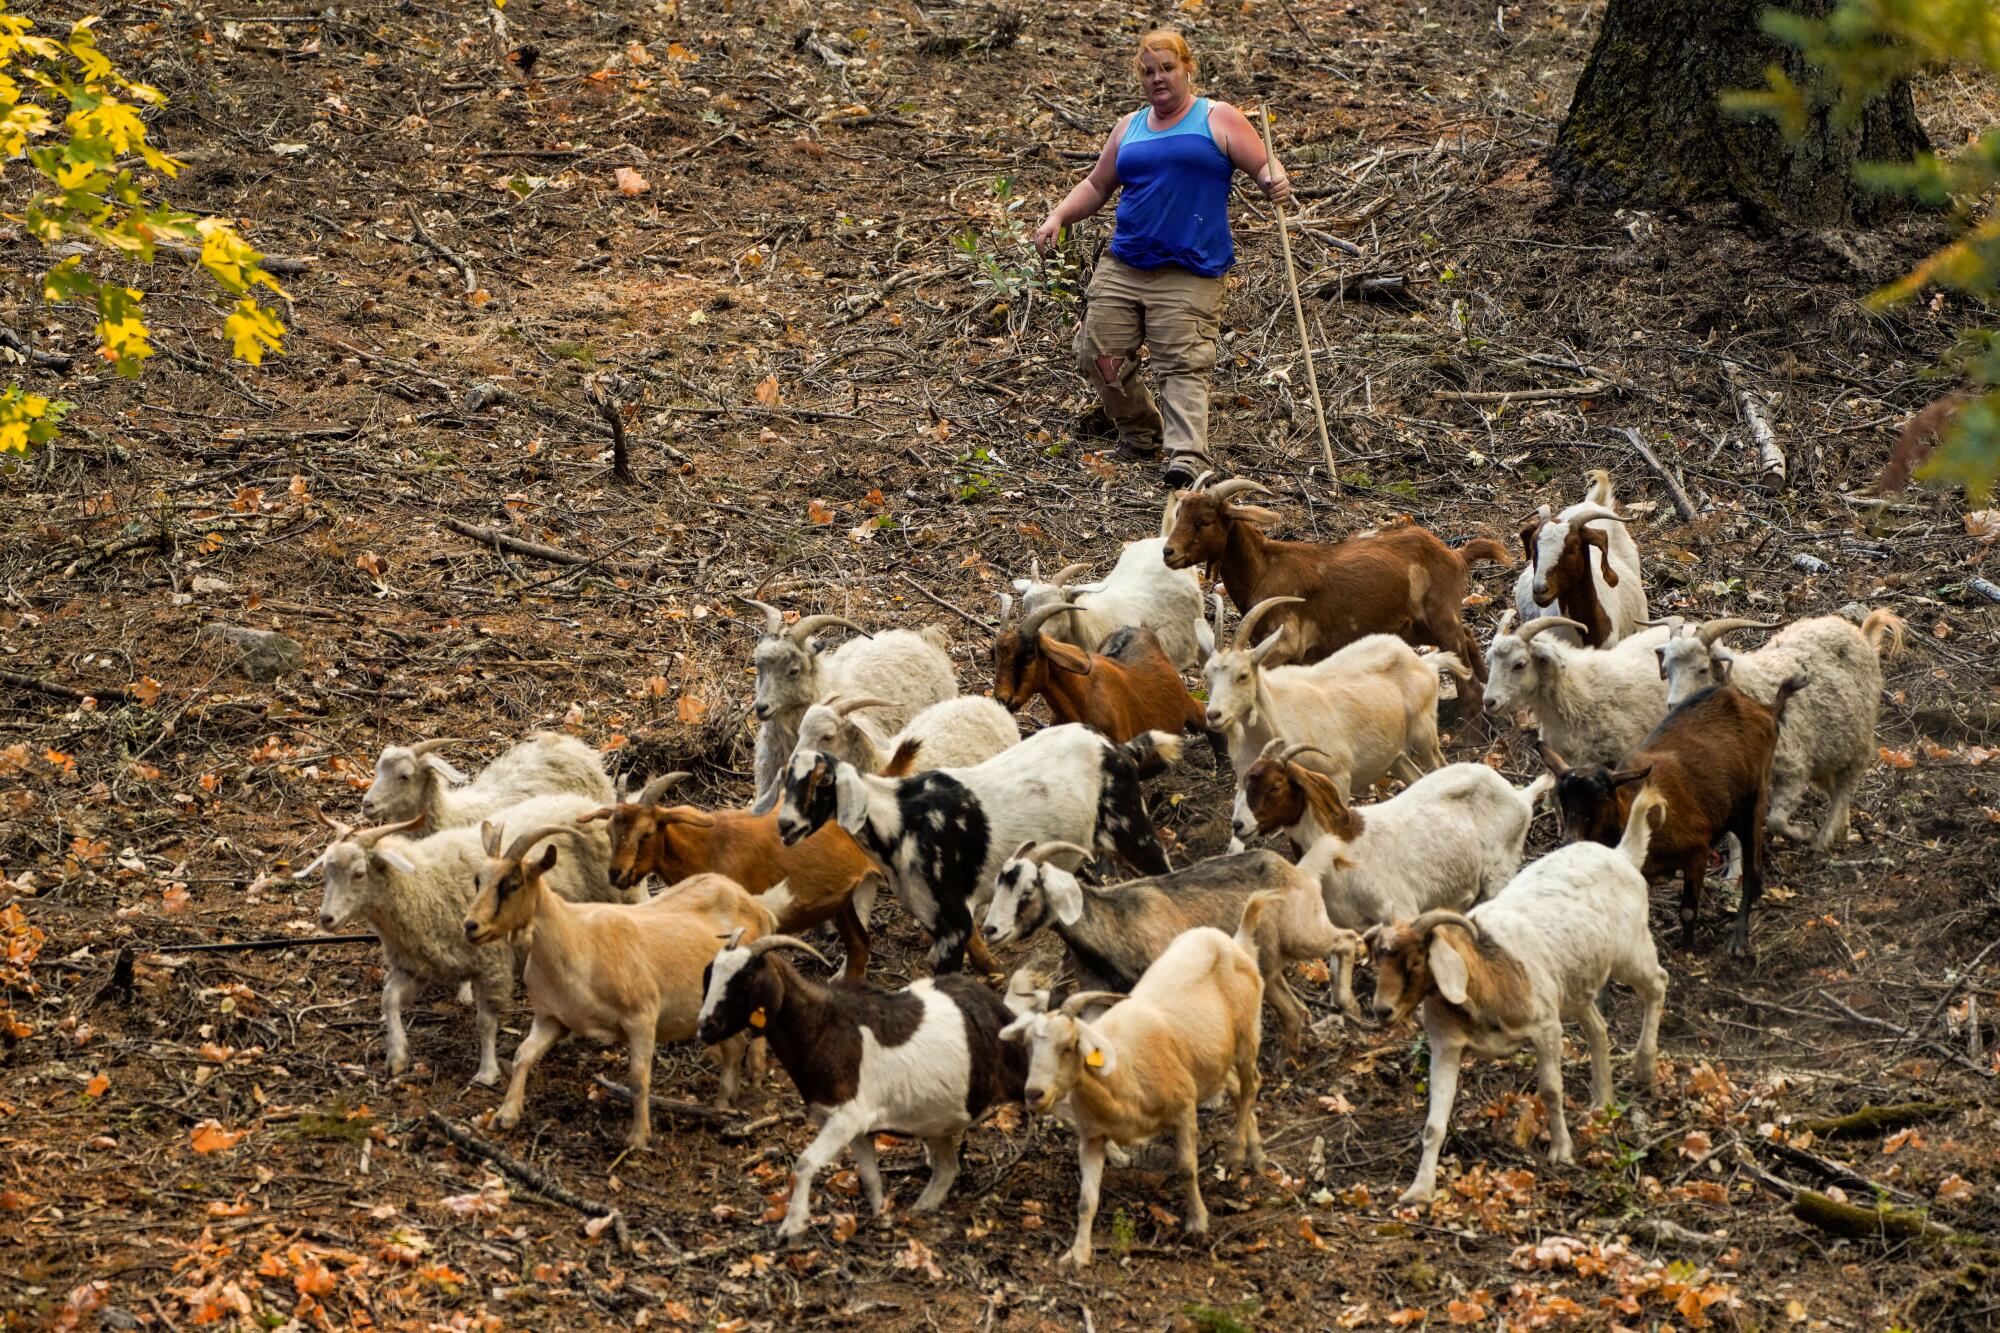 A woman corrals goats to evacuate.